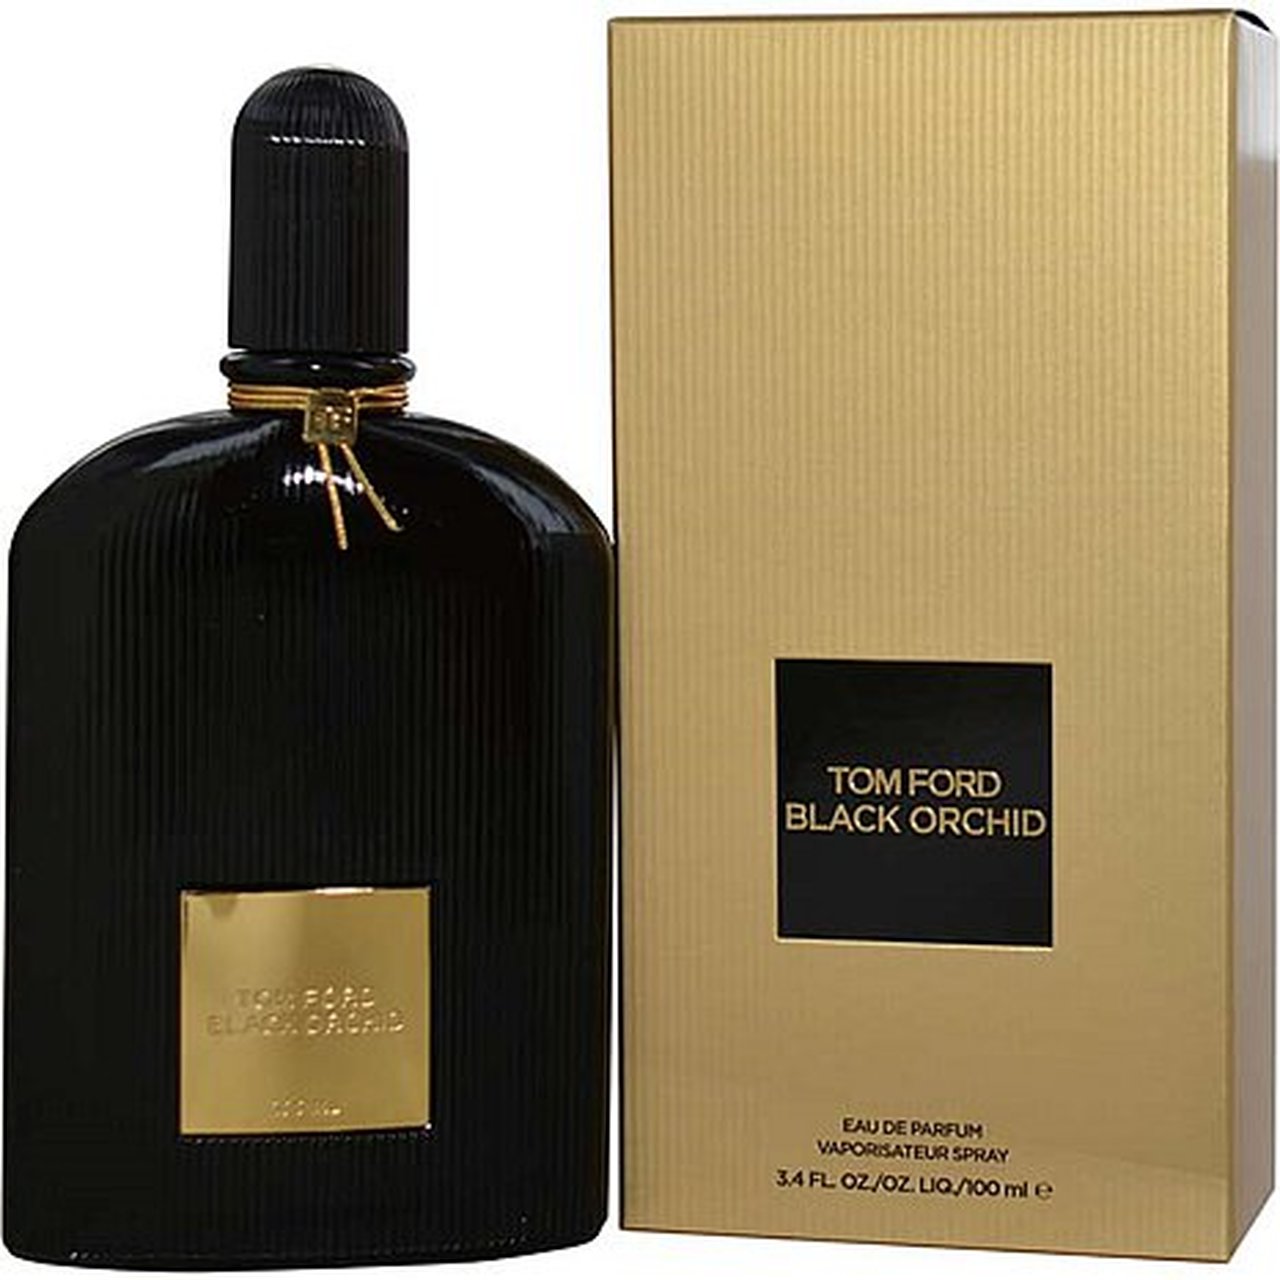 Black Orchid By Tom Ford For Women 3.4 oz EDP Spray